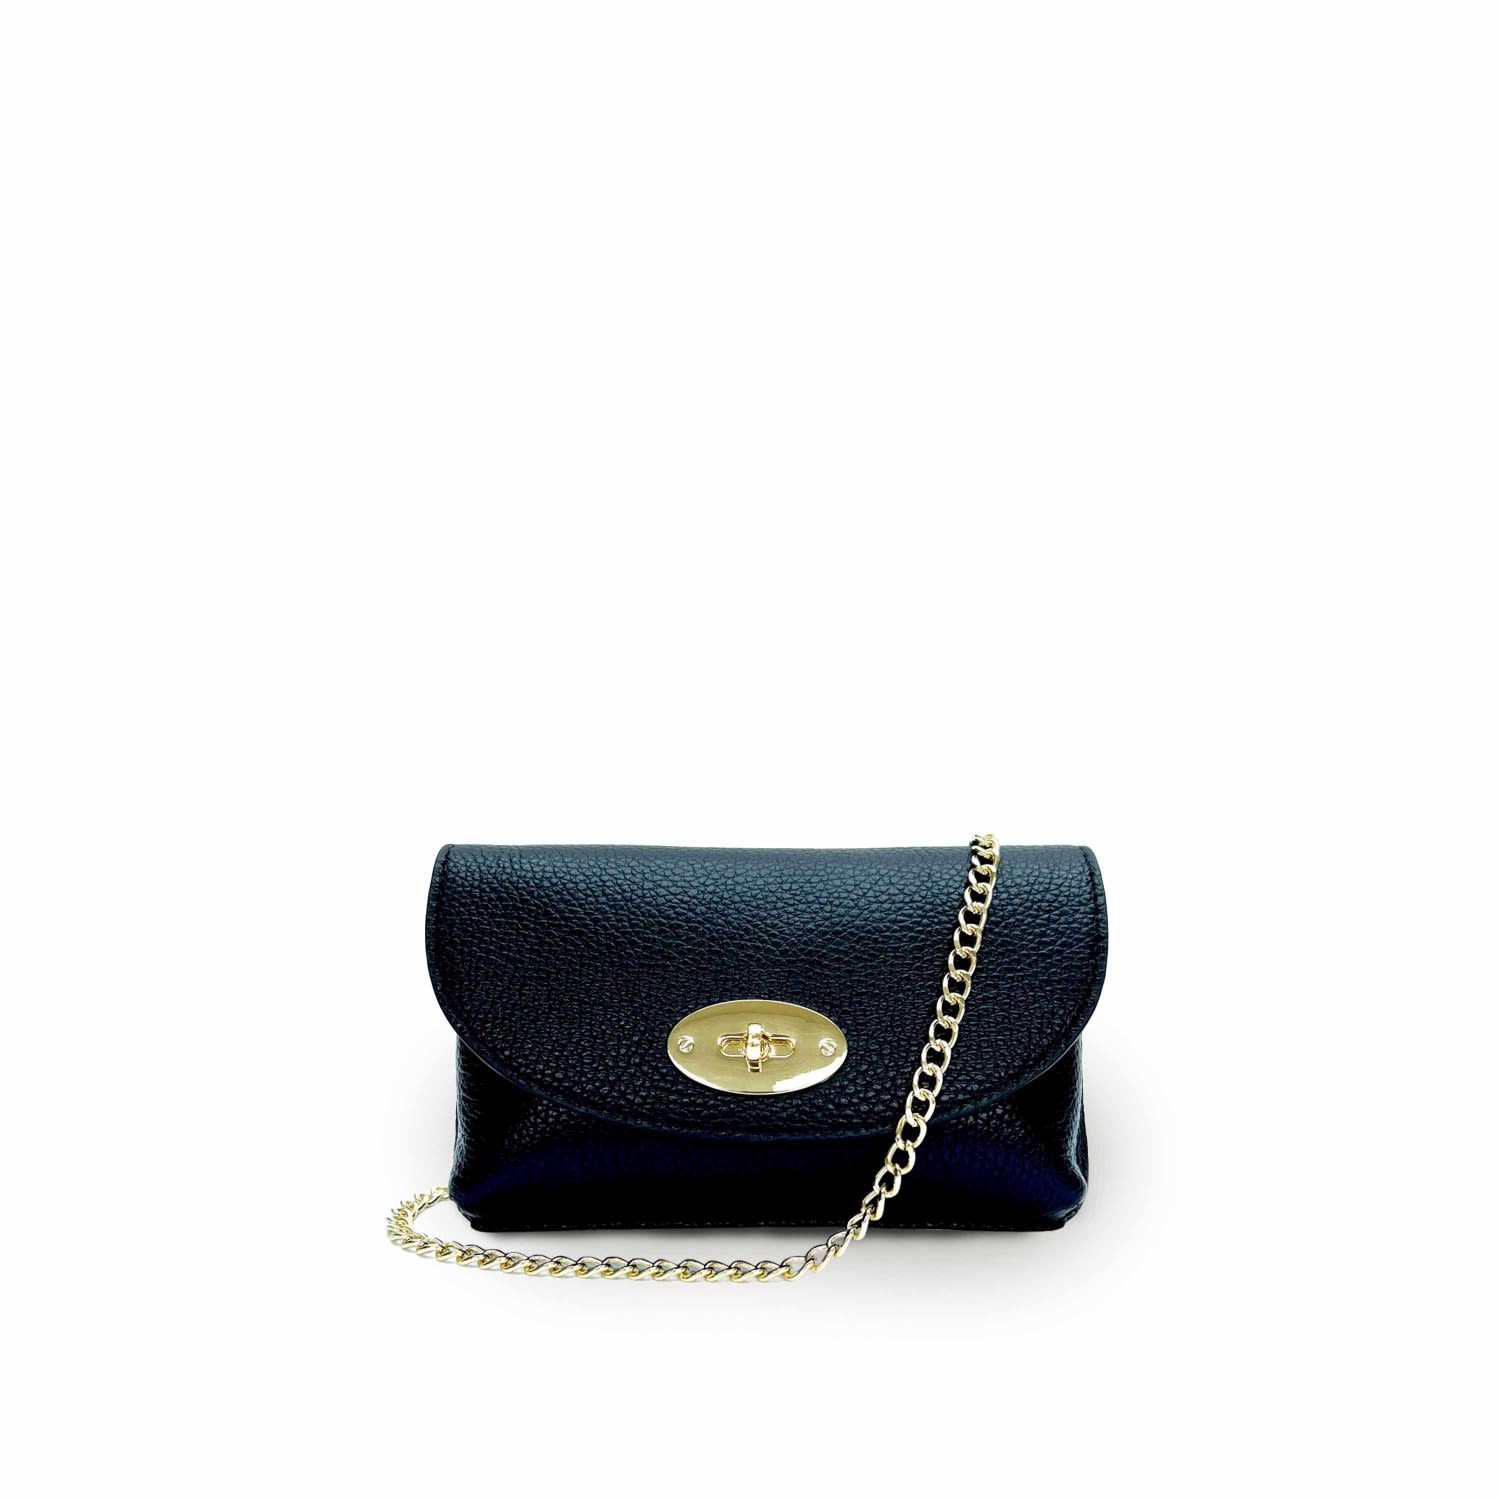 Apatchy London Women's The Mila Black Leather Phone Bag